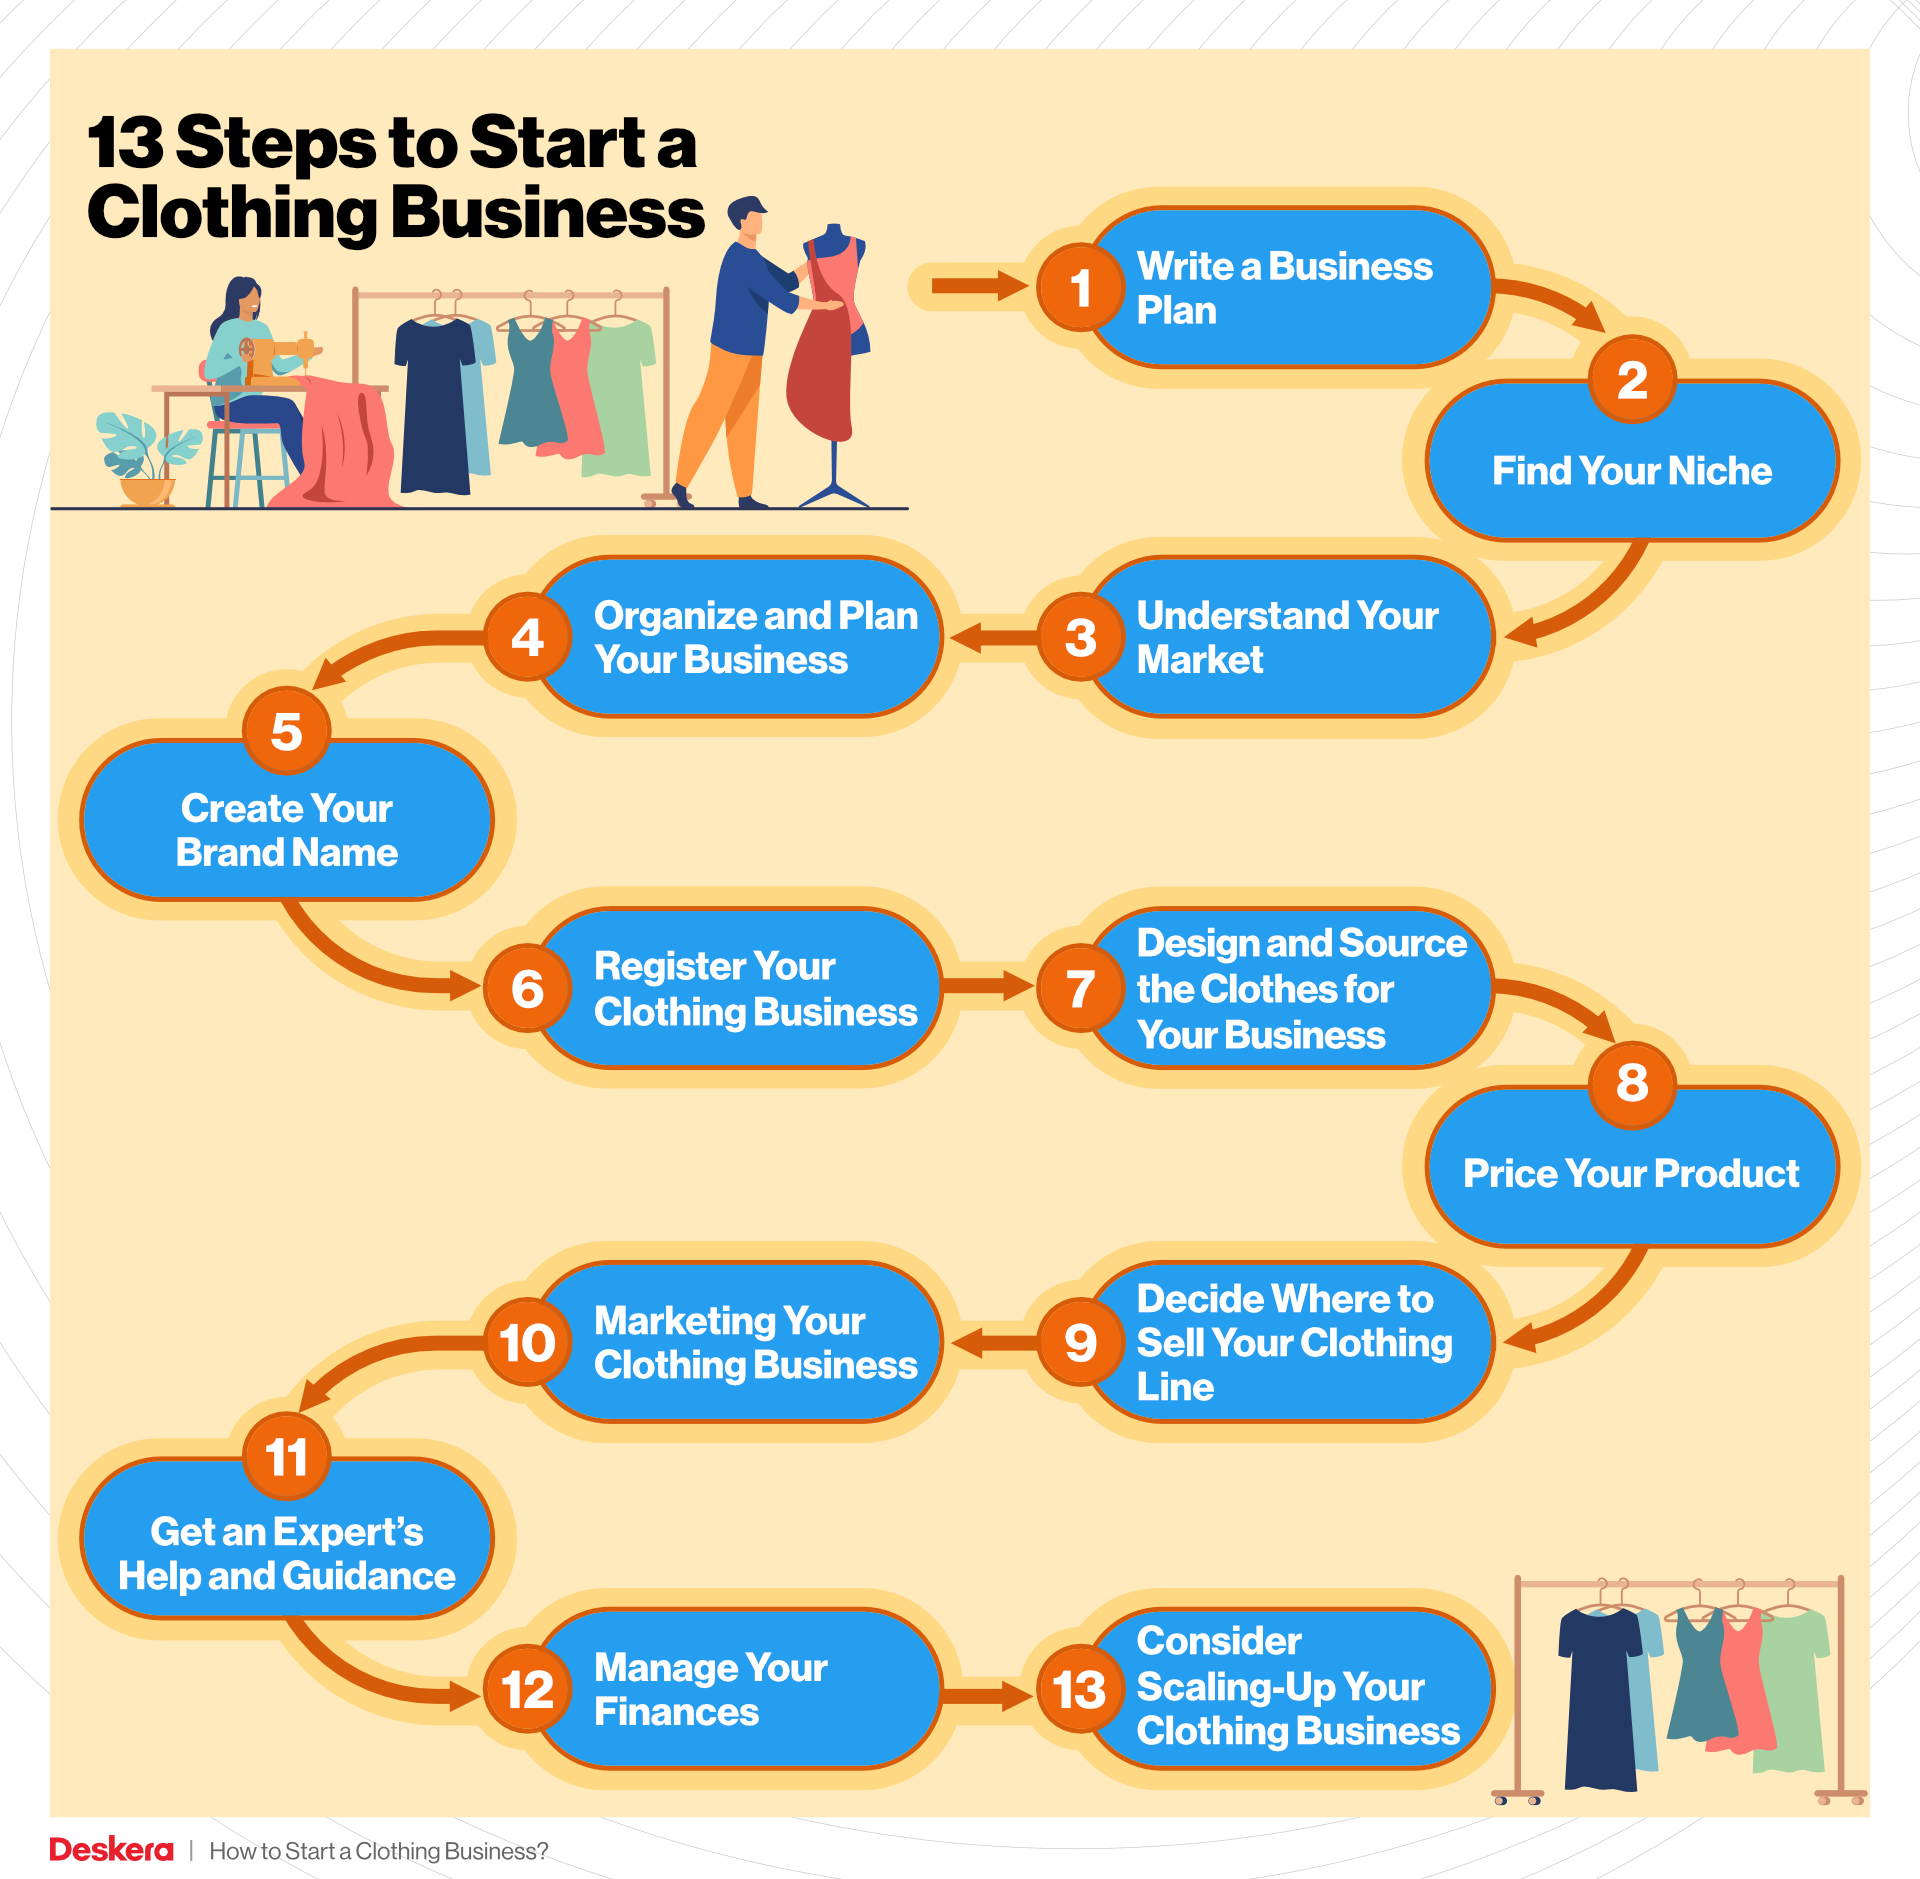 13 Steps to Start a Clothing Business